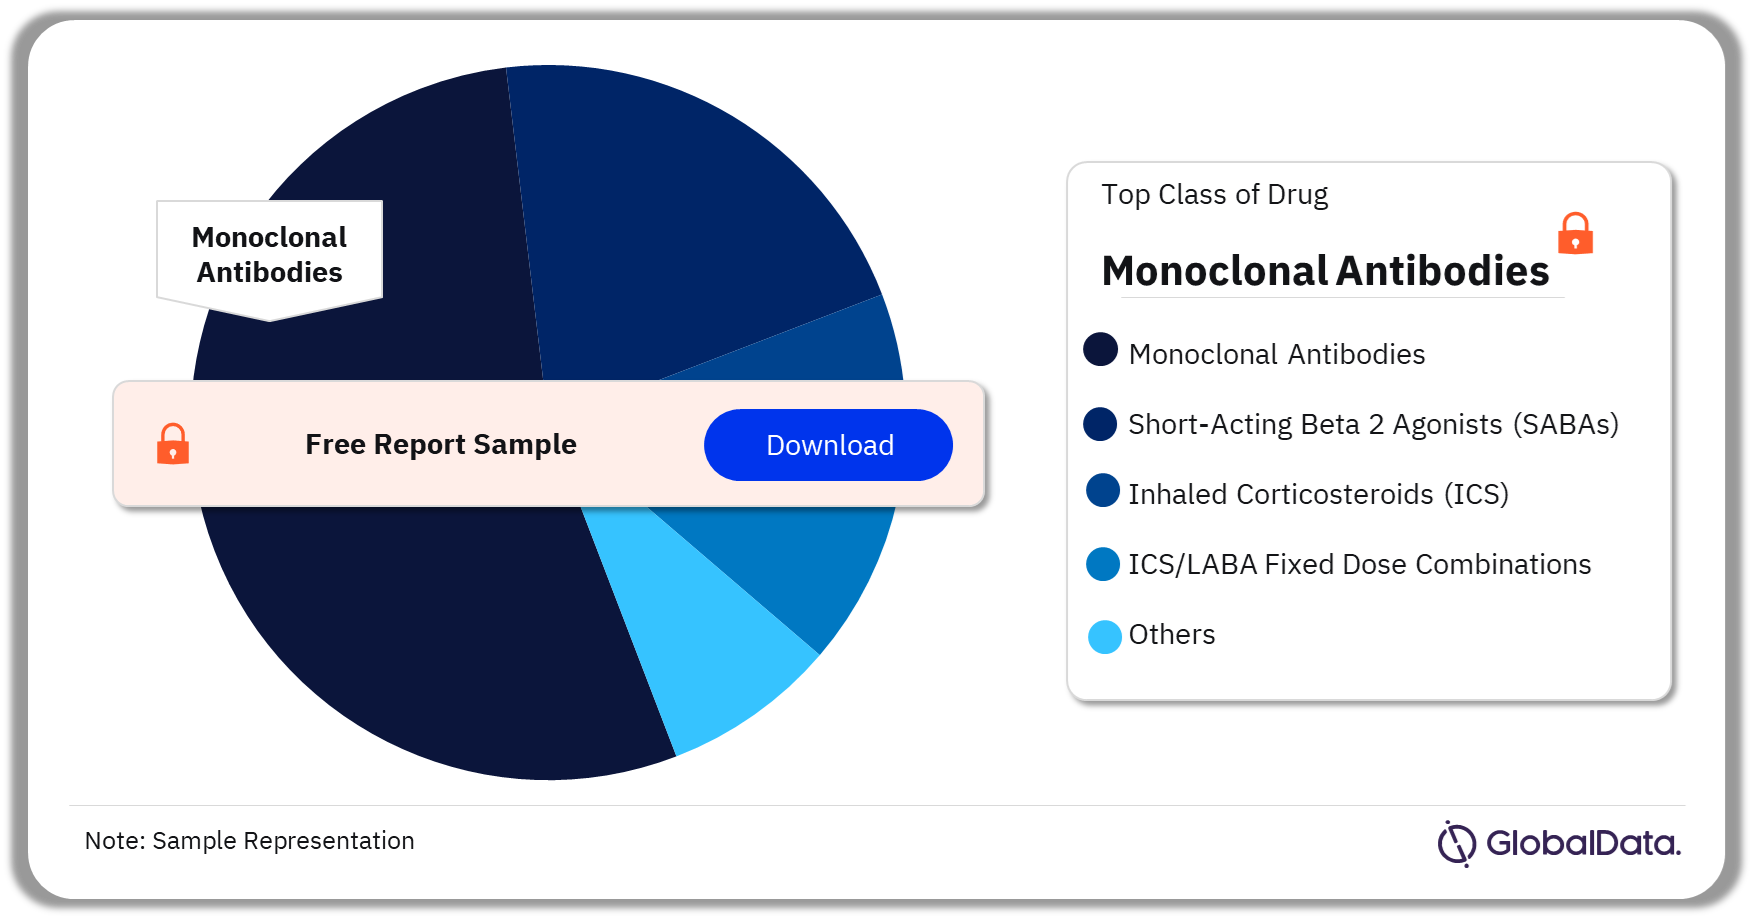 Asthma Market Analysis by Class of Drugs in the US, 2019 (%)